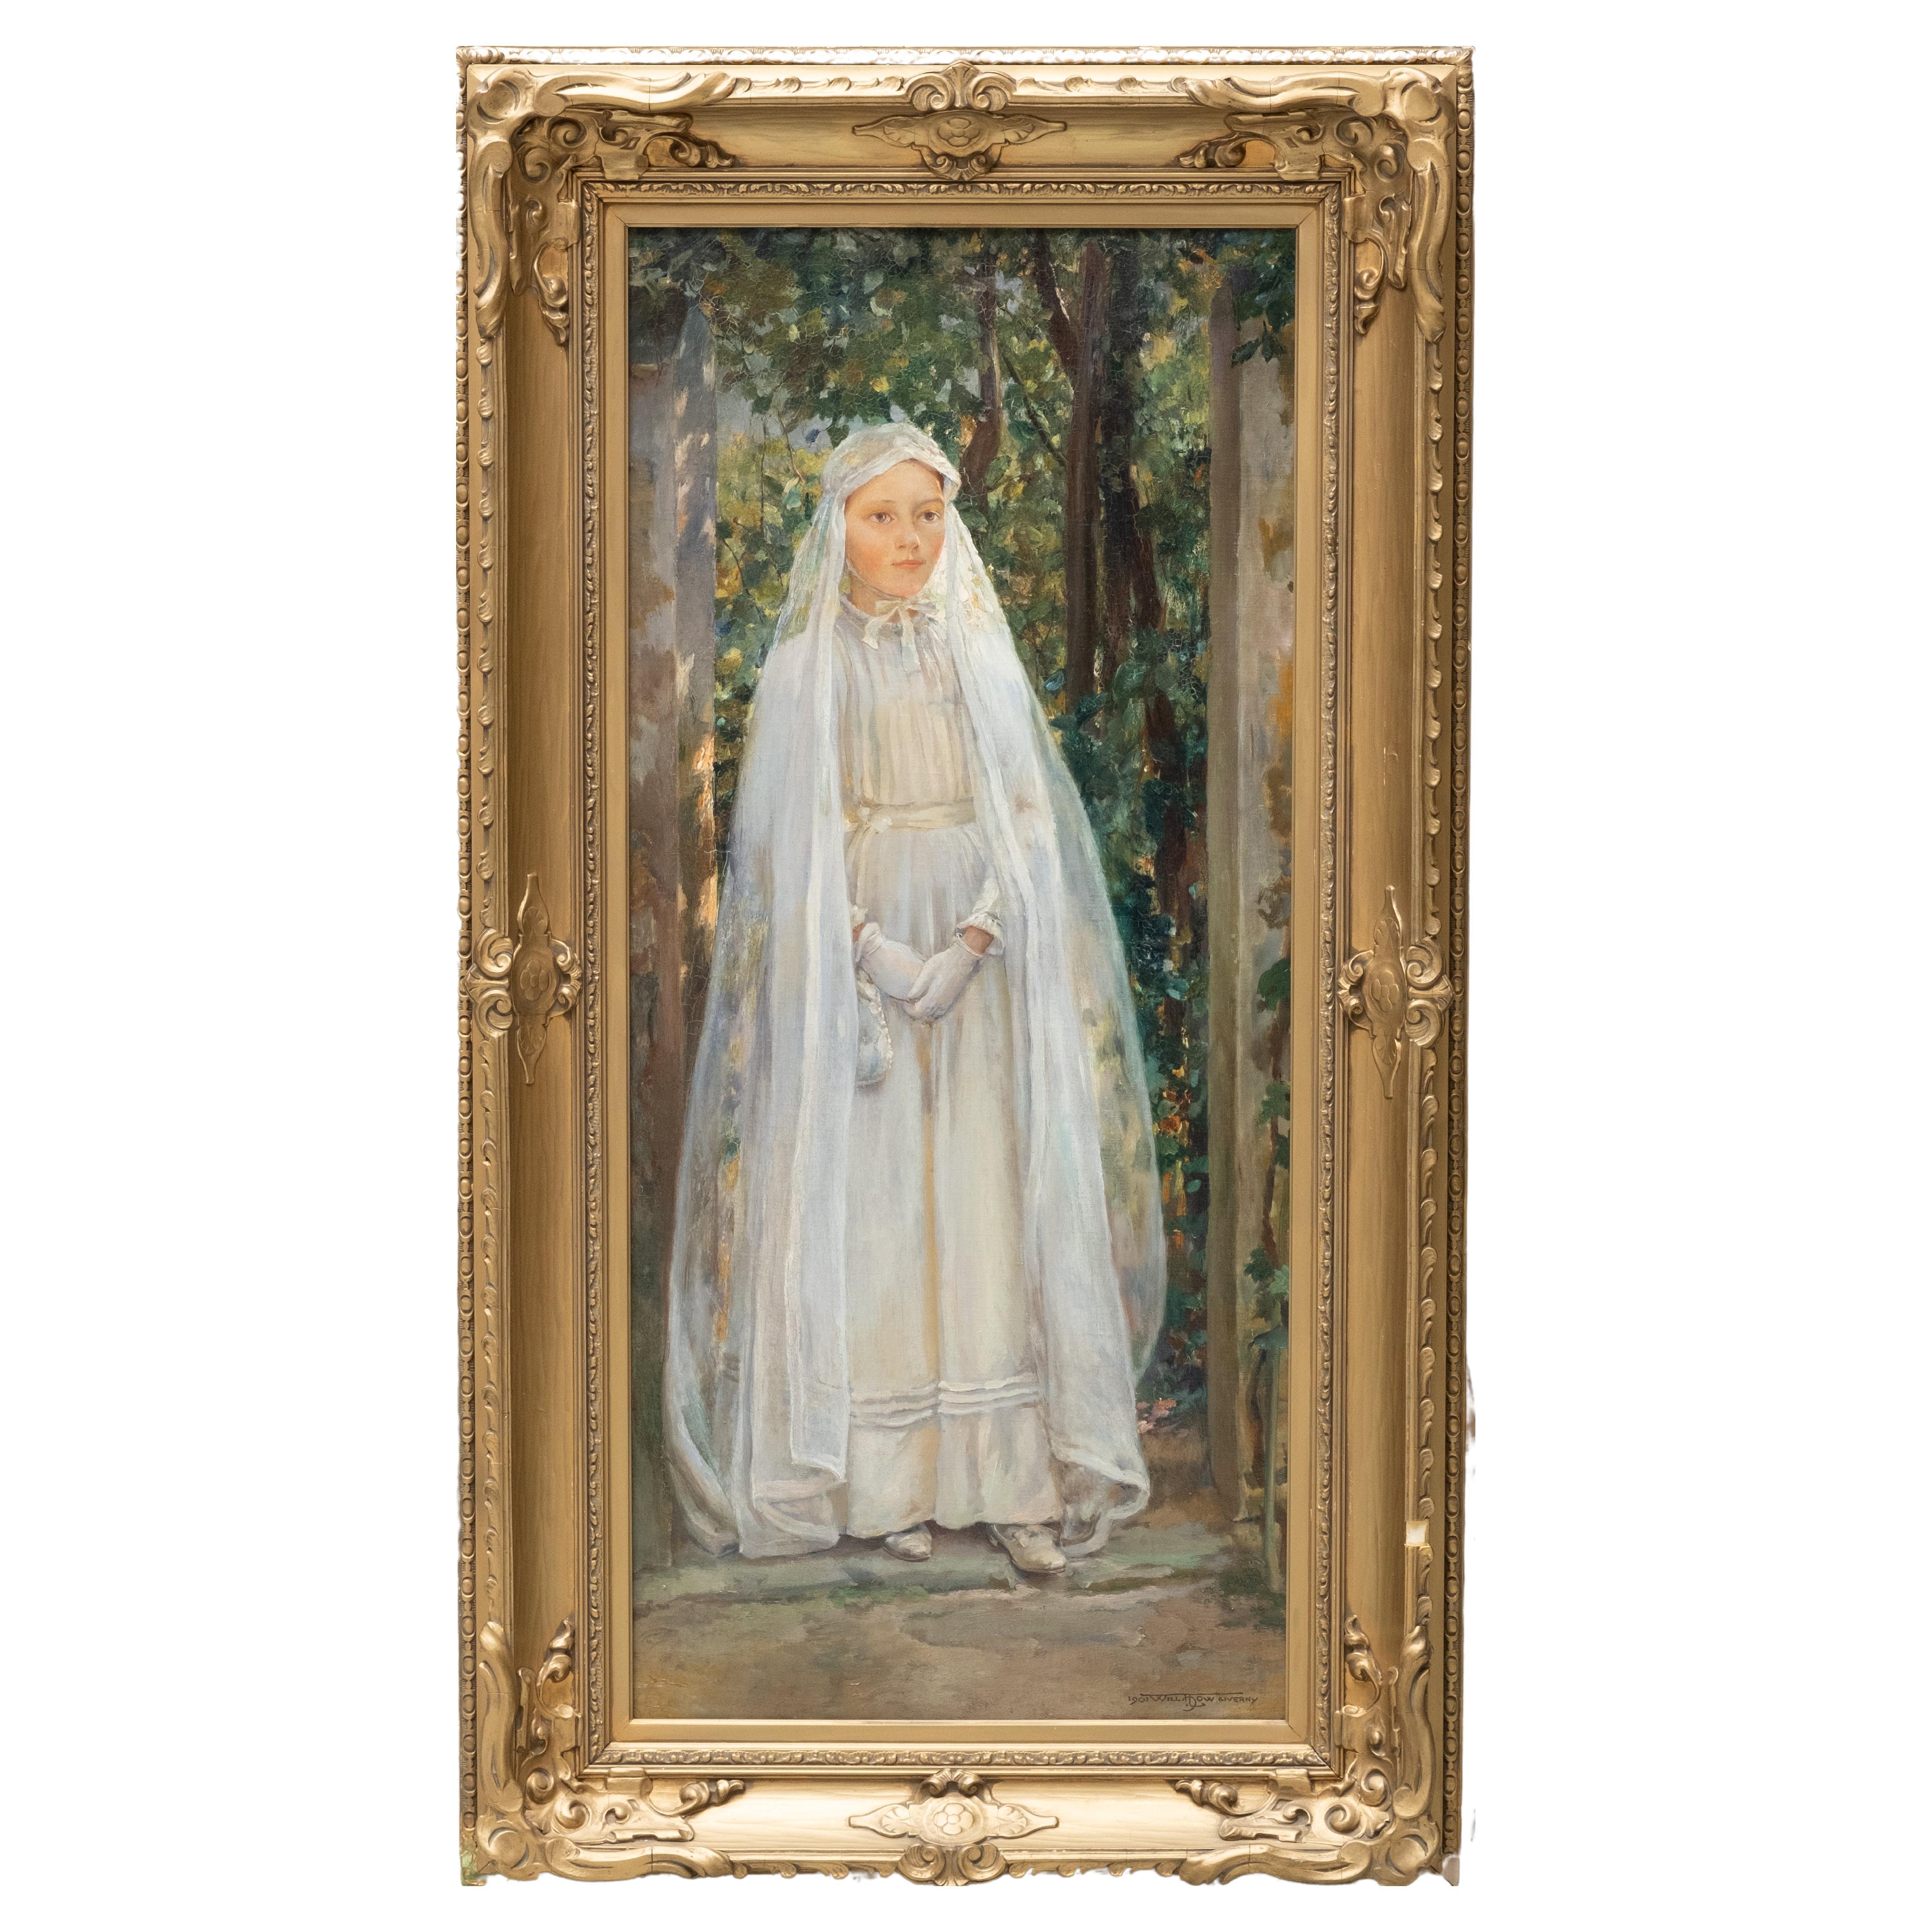 Signed Will Hicok Low, 'Young French Girl on her First Communion'. Oil on Canvas